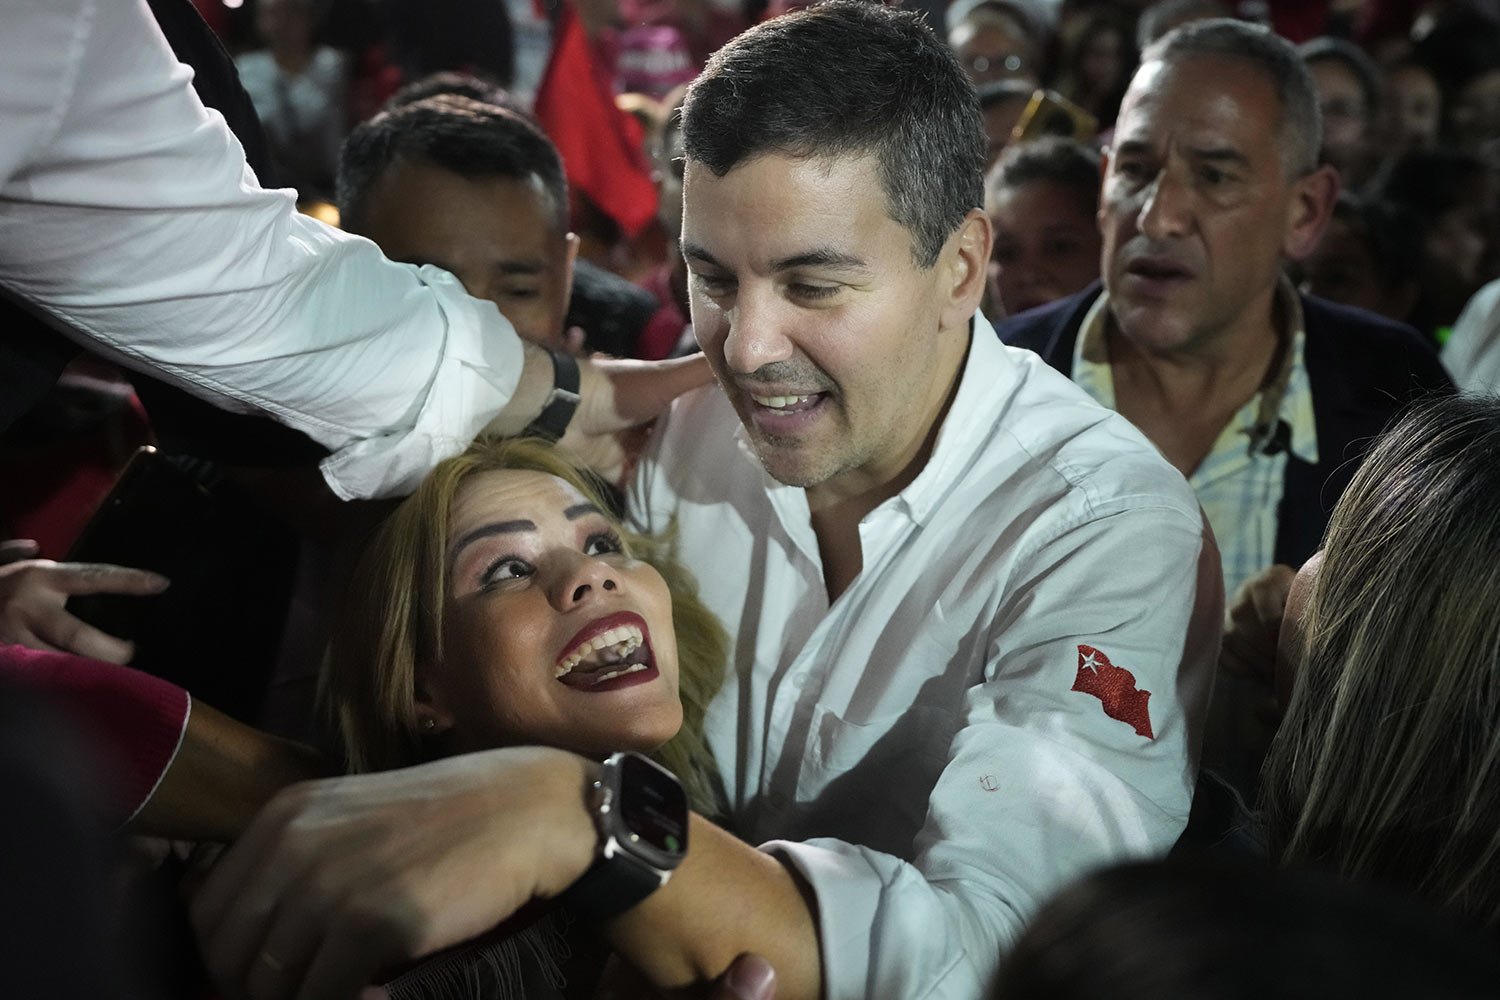  Santiago Peña, presidential candidate for the ruling Colorado Party, greets a supporter as he arrives to his campaign rally in Villa Elisa, Paraguay, April 26, 2023. Pena won the election on April 30. (AP Photo/Jorge Saenz) 